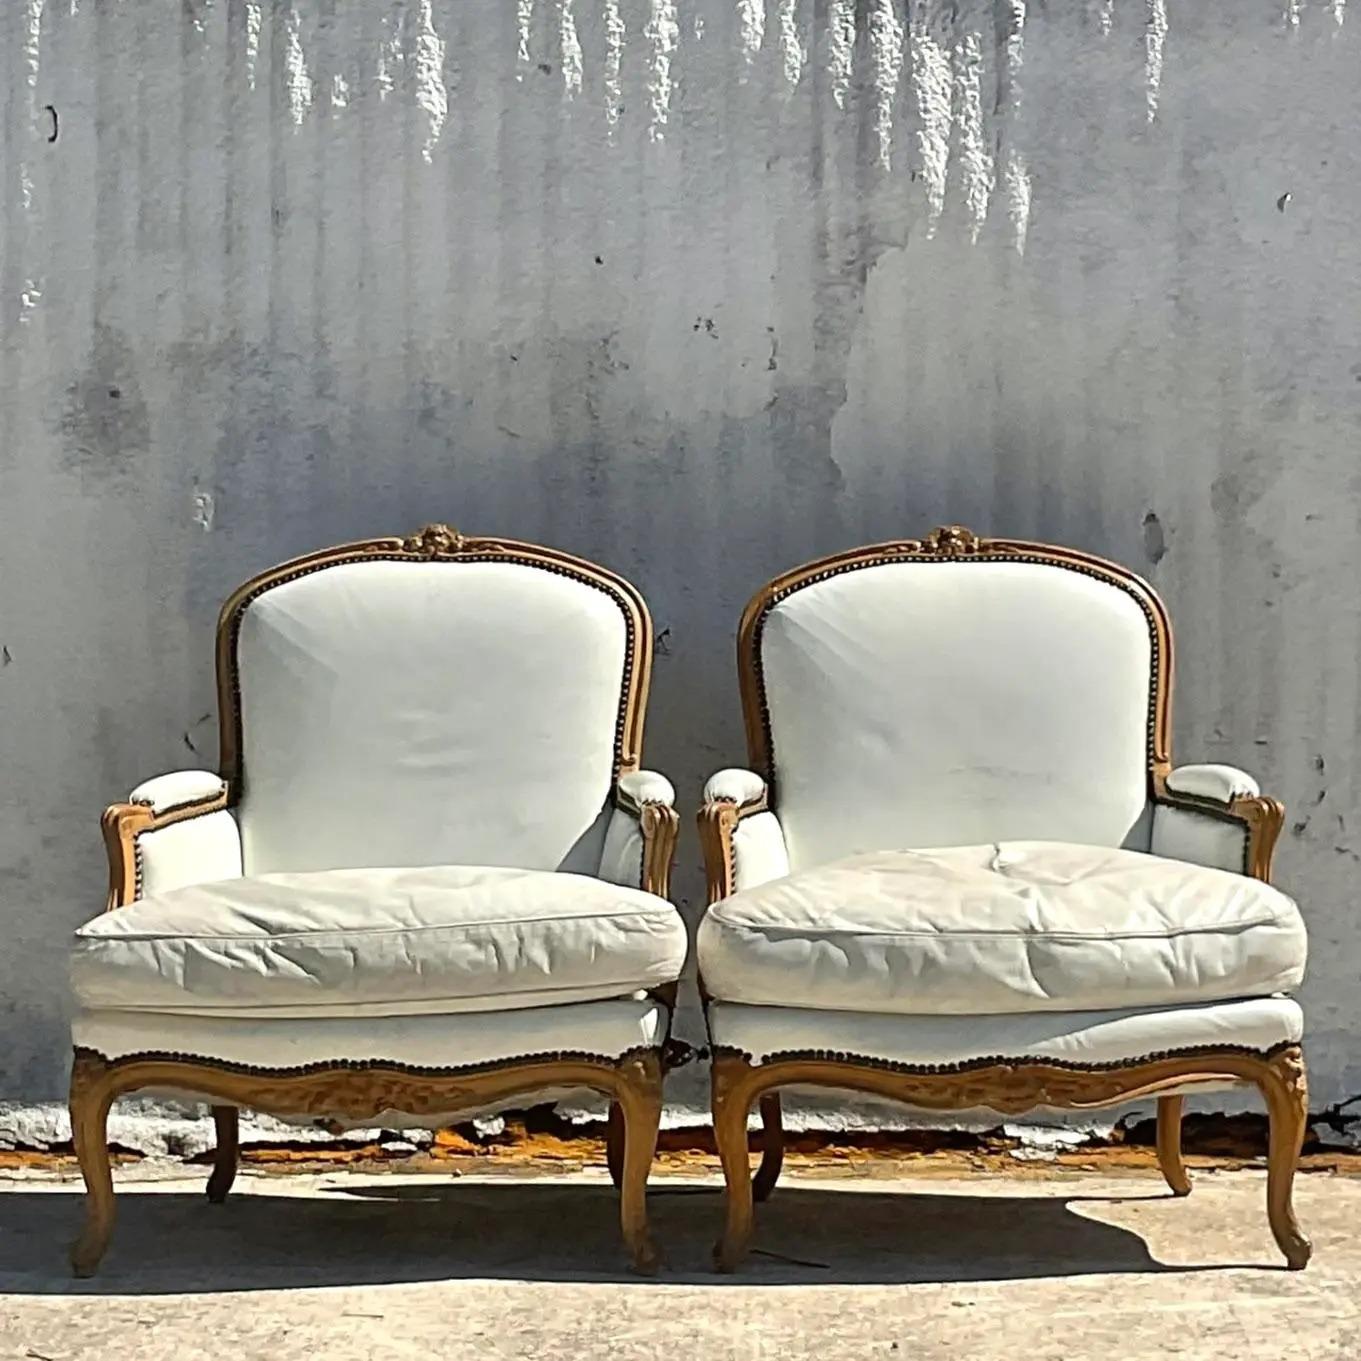 Vintage Boho John Dickinson White Leather Bergere Chairs - a Pair For Sale 3